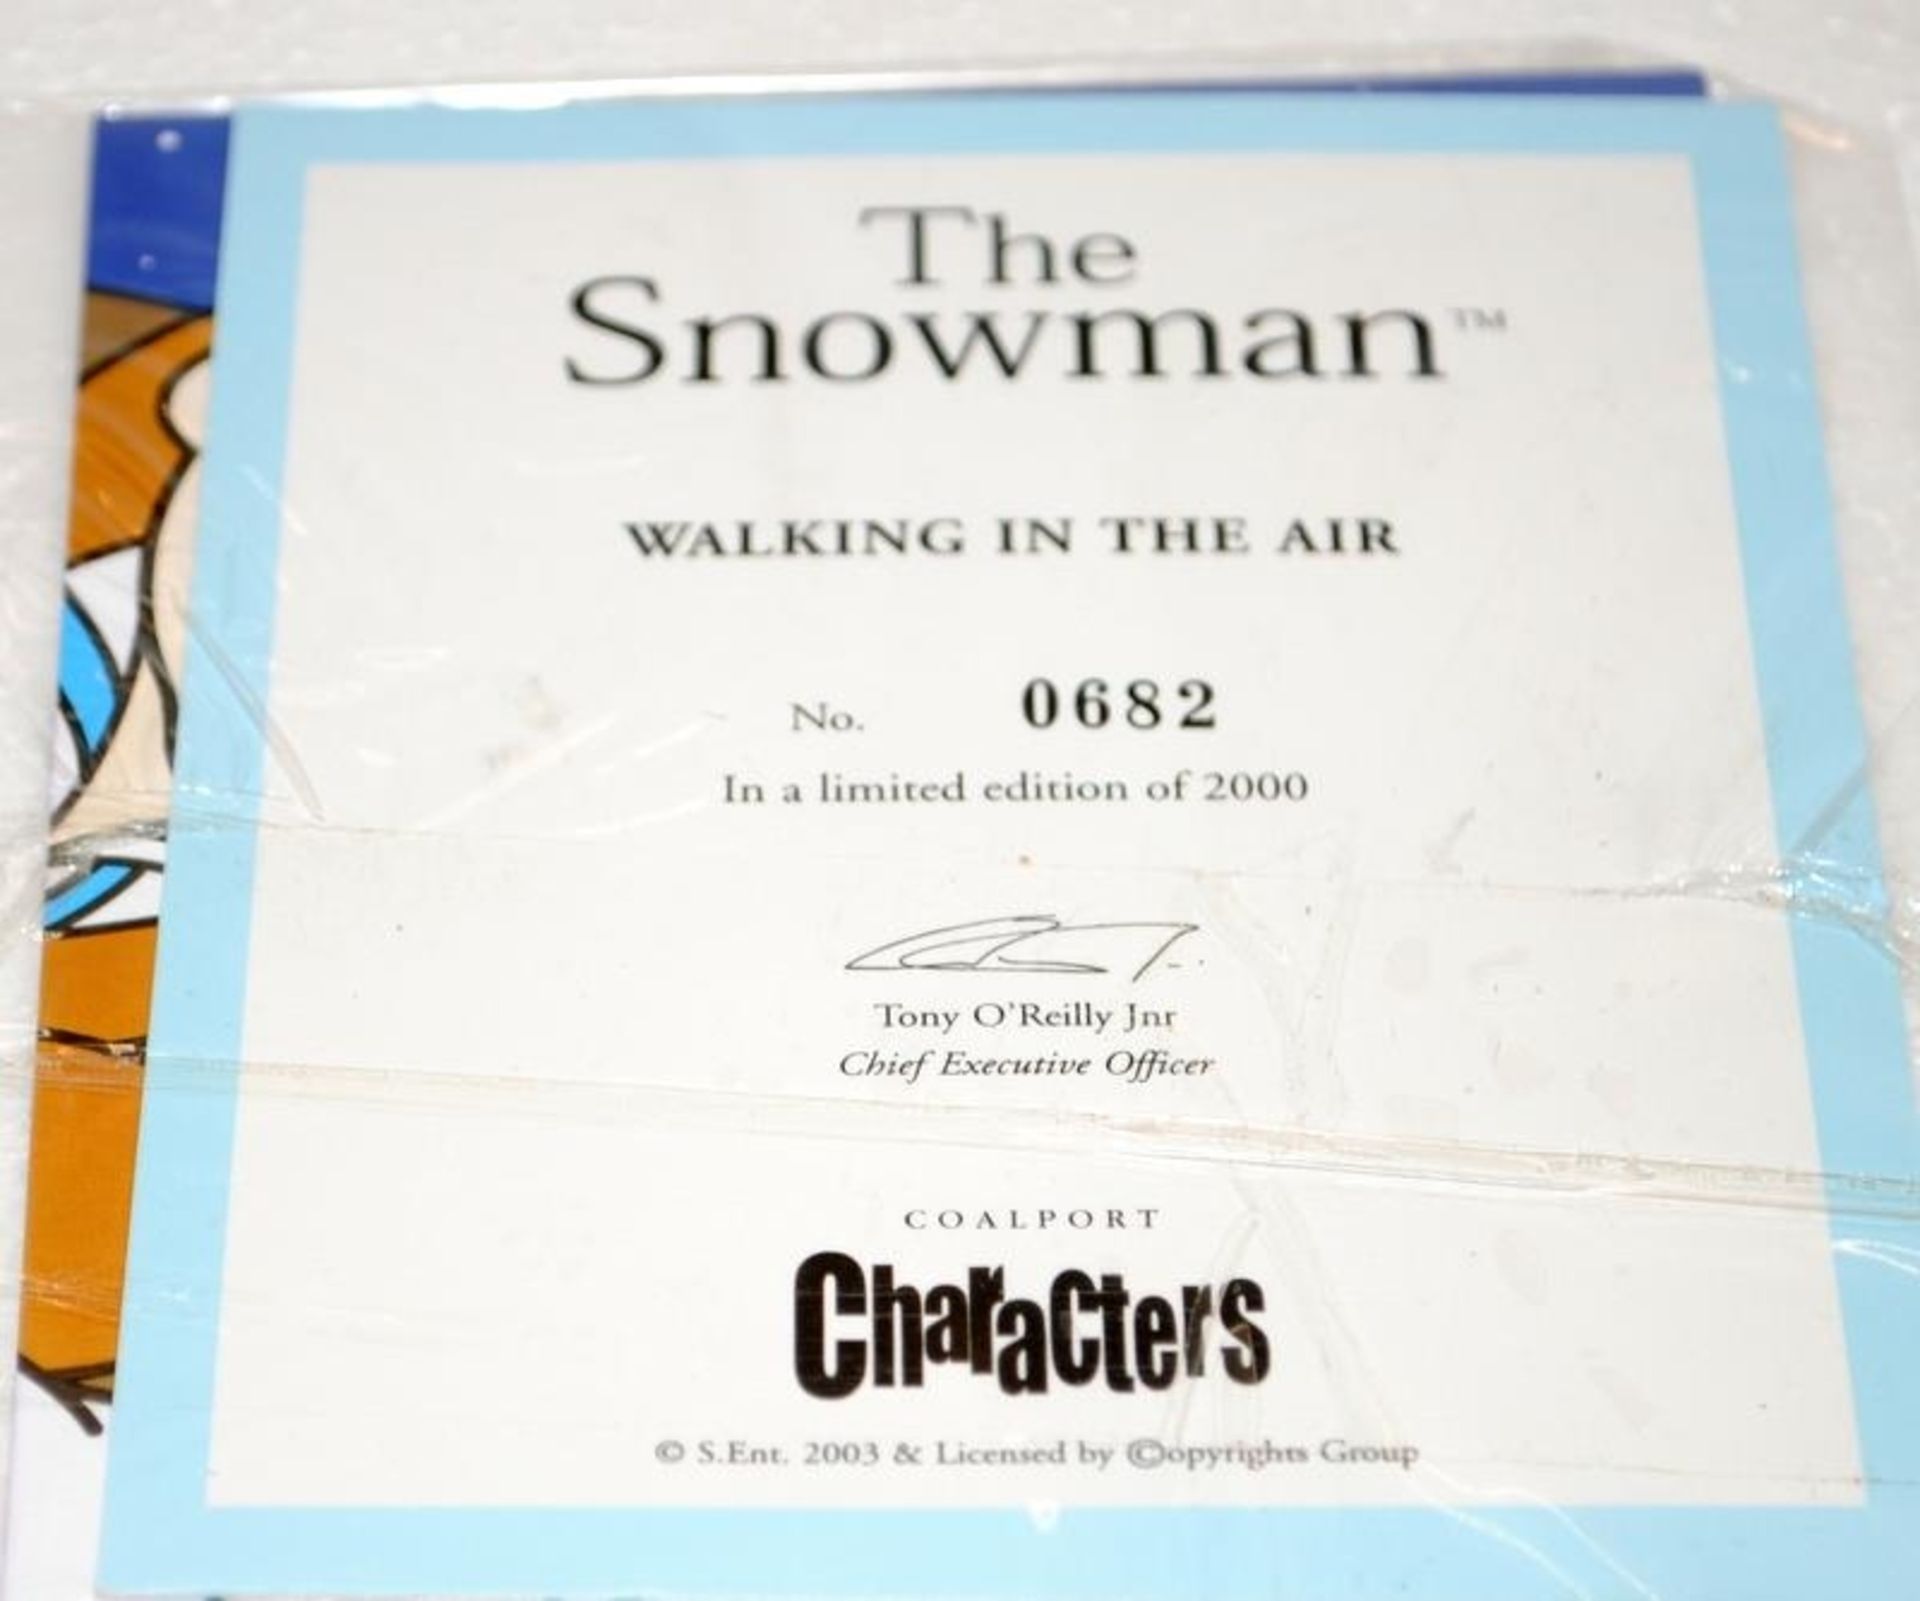 Coalport The Snowman Limited Edition Figurine: Walking In The Air, 682/2000. Boxed with certificate - Image 3 of 4